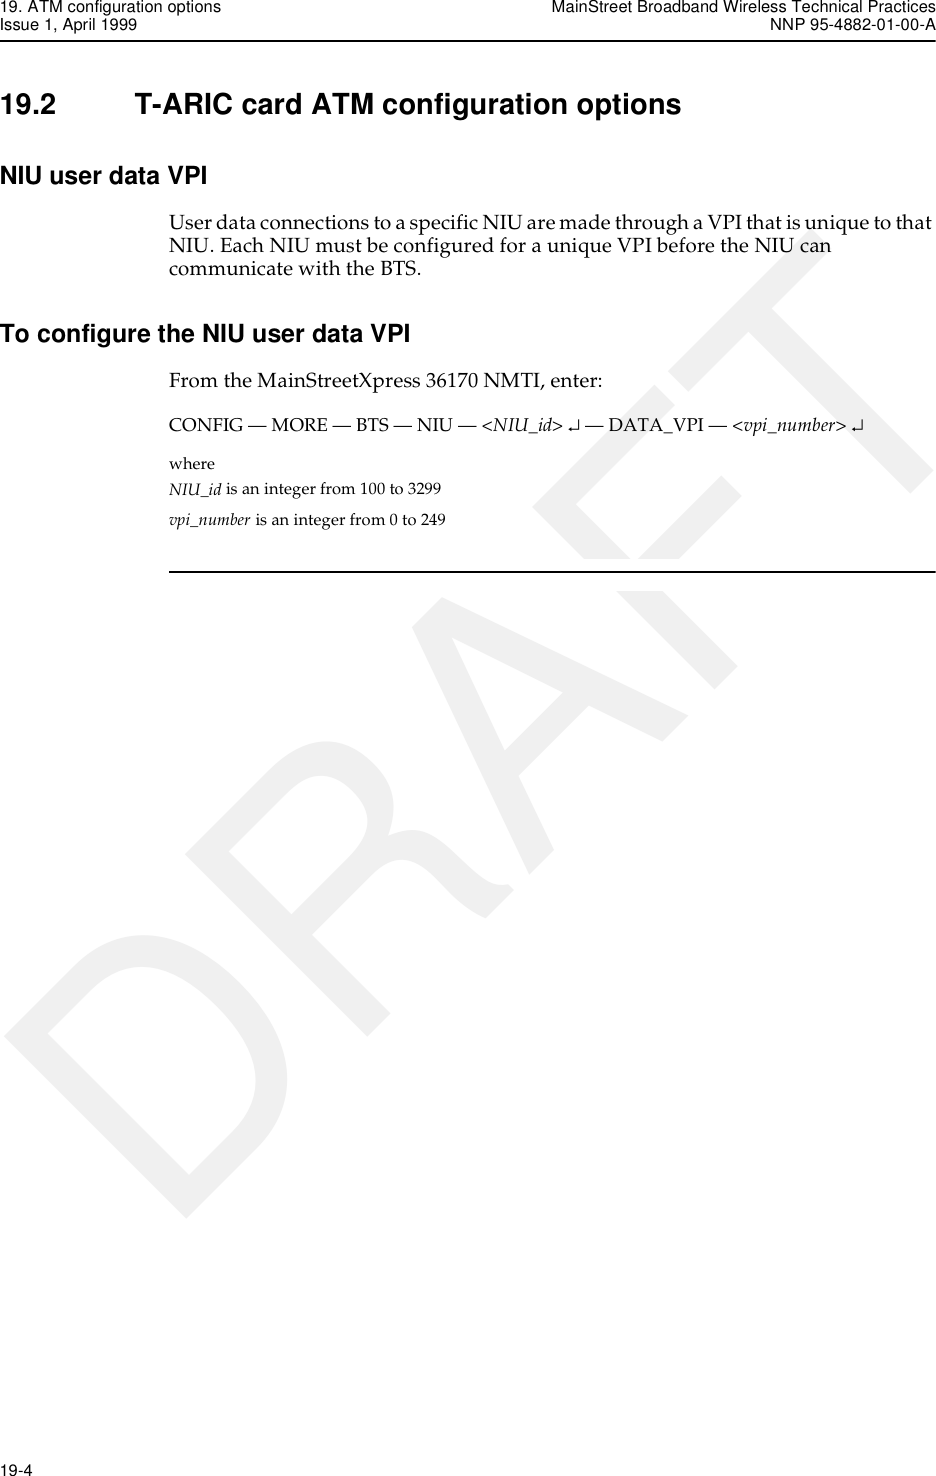 19. ATM configuration options MainStreet Broadband Wireless Technical PracticesIssue 1, April 1999 NNP 95-4882-01-00-A19-4   DRAFT19.2 T-ARIC card ATM configuration optionsNIU user data VPIUser data connections to a specific NIU are made through a VPI that is unique to that NIU. Each NIU must be configured for a unique VPI before the NIU can communicate with the BTS.To configure the NIU user data VPIFrom the MainStreetXpress 36170 NMTI, enter:CONFIG — MORE — BTS — NIU — &lt;NIU_id&gt; ↵ — DATA_VPI — &lt;vpi_number&gt; ↵where NIU_id is an integer from 100 to 3299vpi_number is an integer from 0 to 249